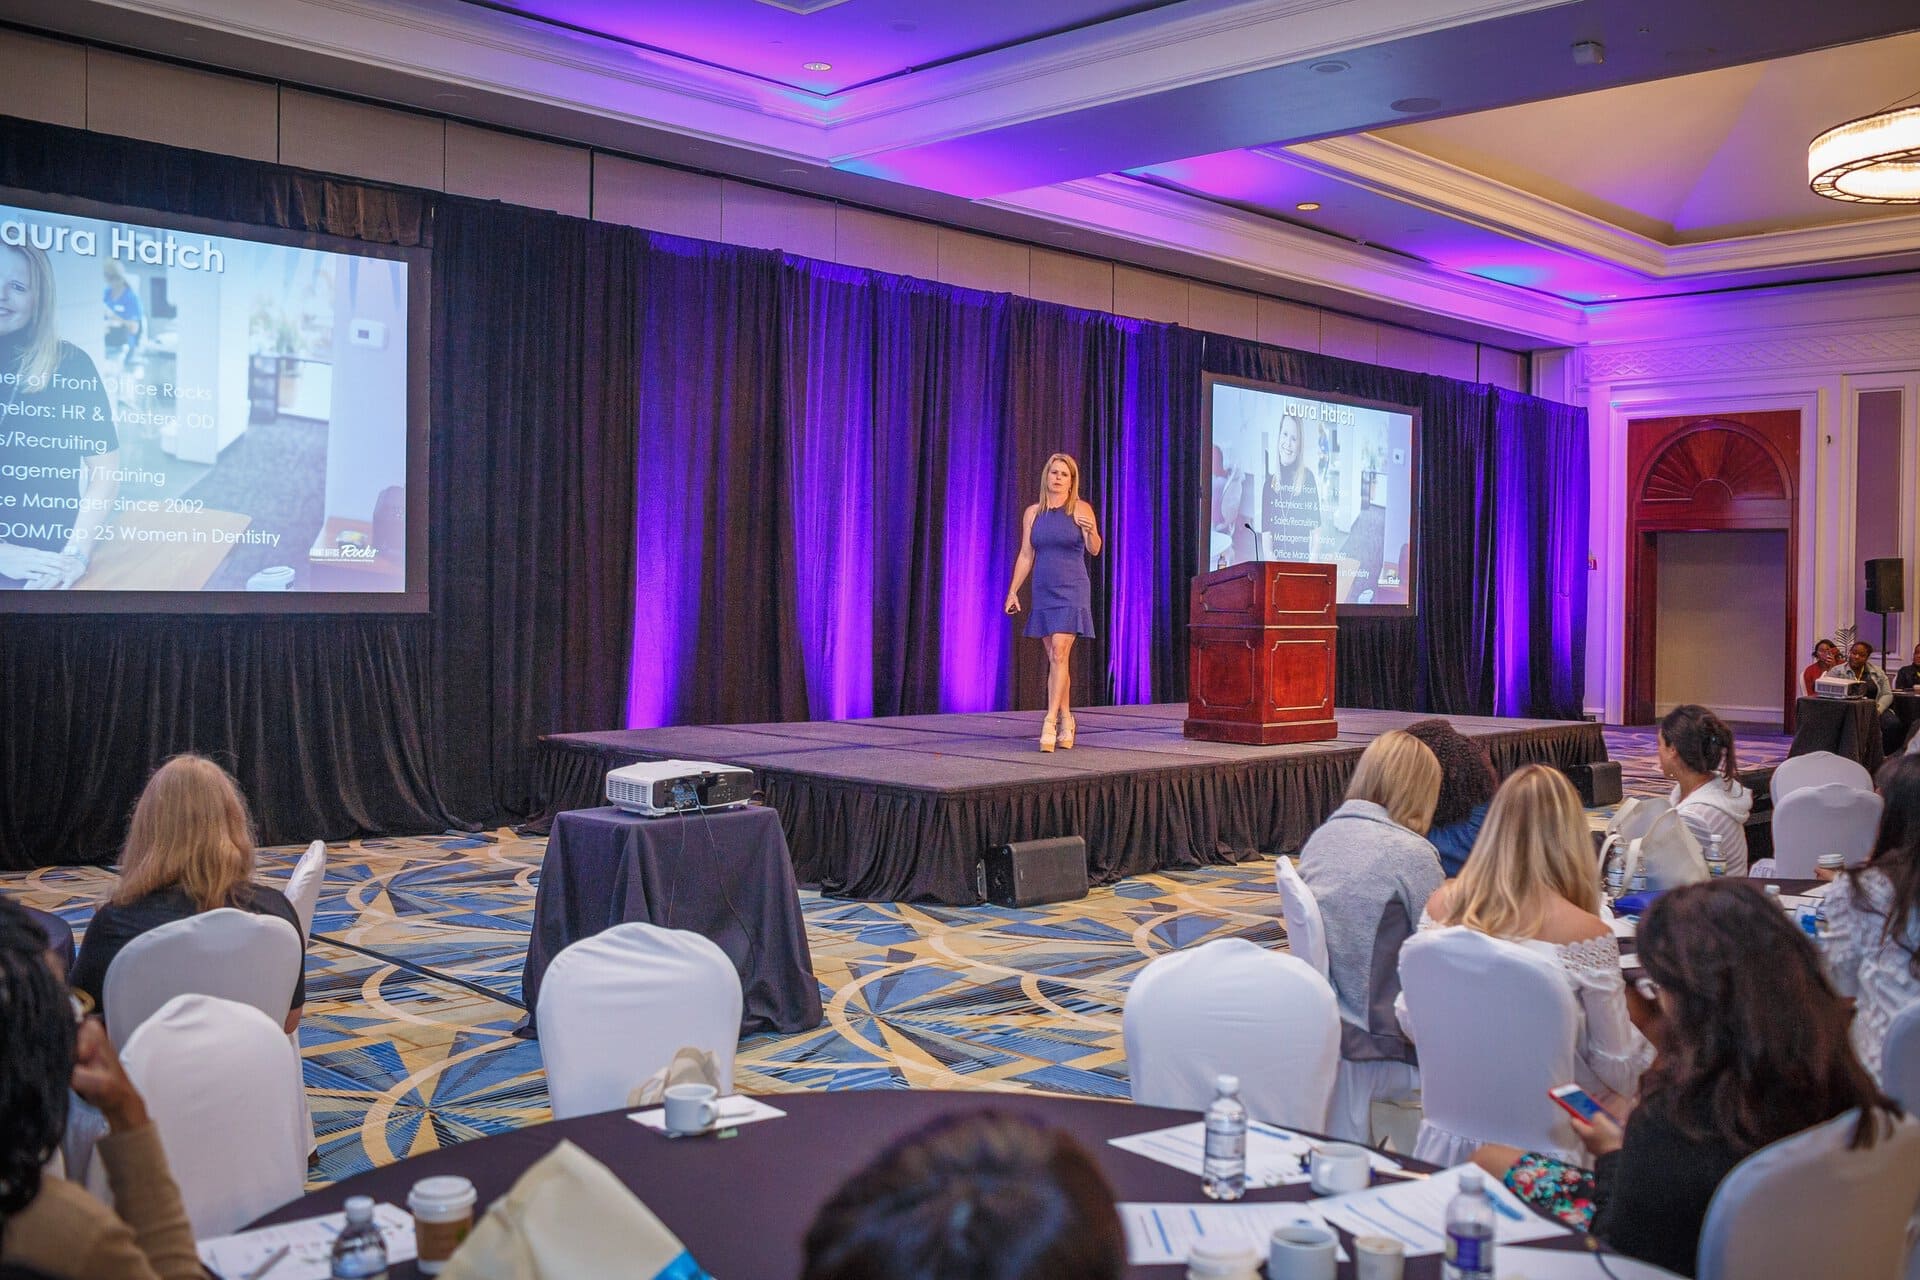 Laura Nelson speaking at a dental conference